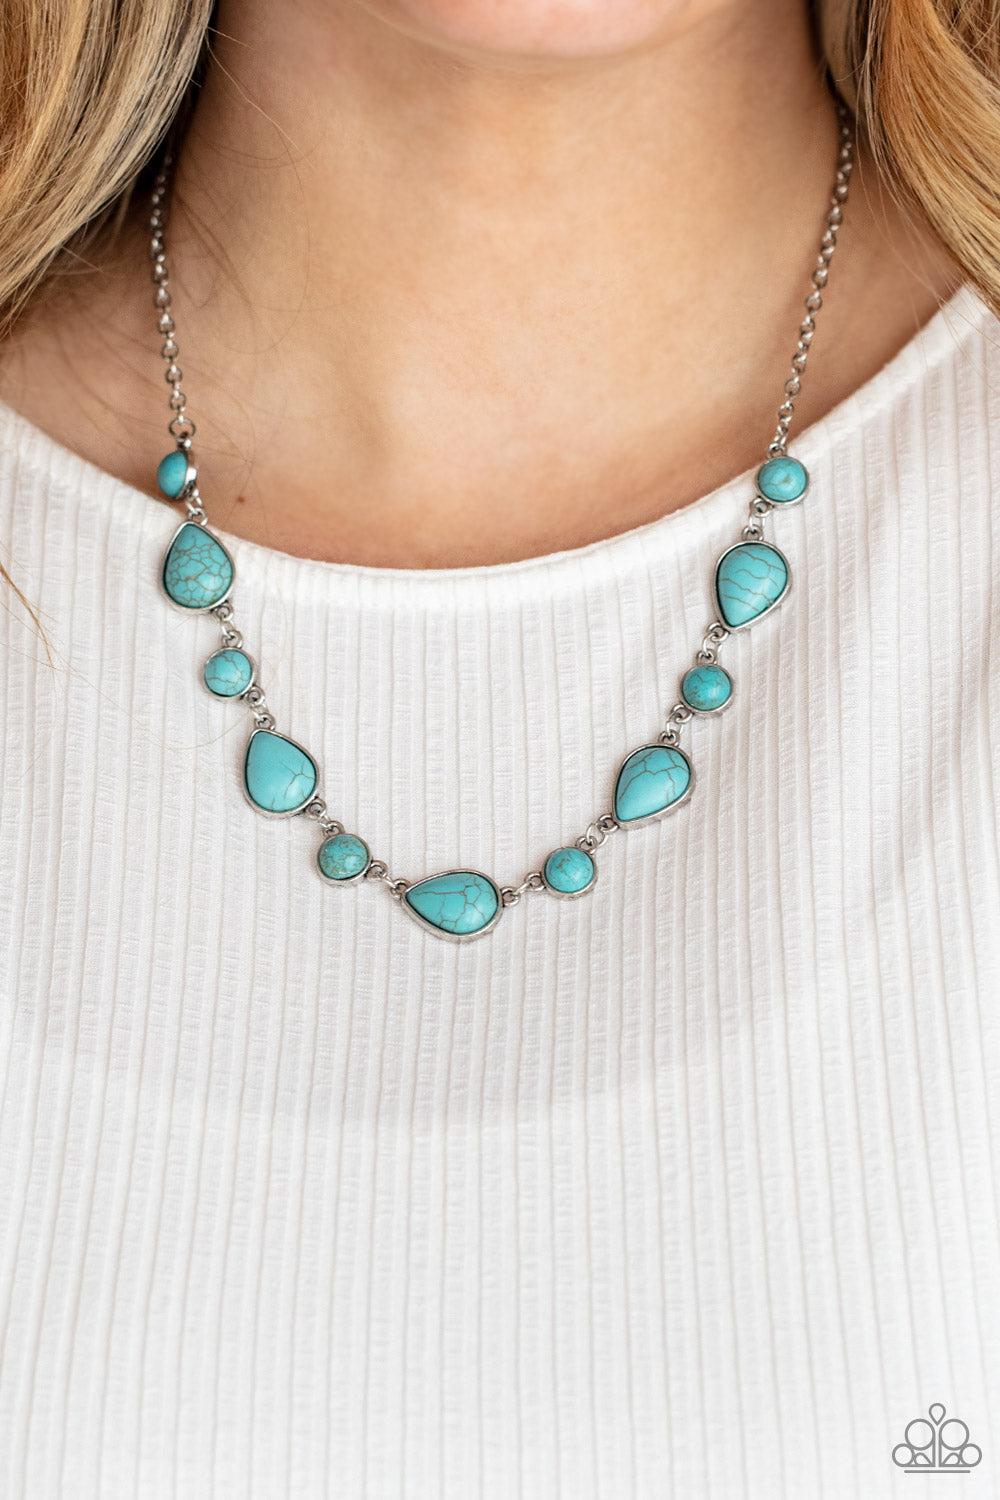 Heavenly Teardrops Turquoise Blue Stone Necklace - Paparazzi Accessories- on model - CarasShop.com - $5 Jewelry by Cara Jewels